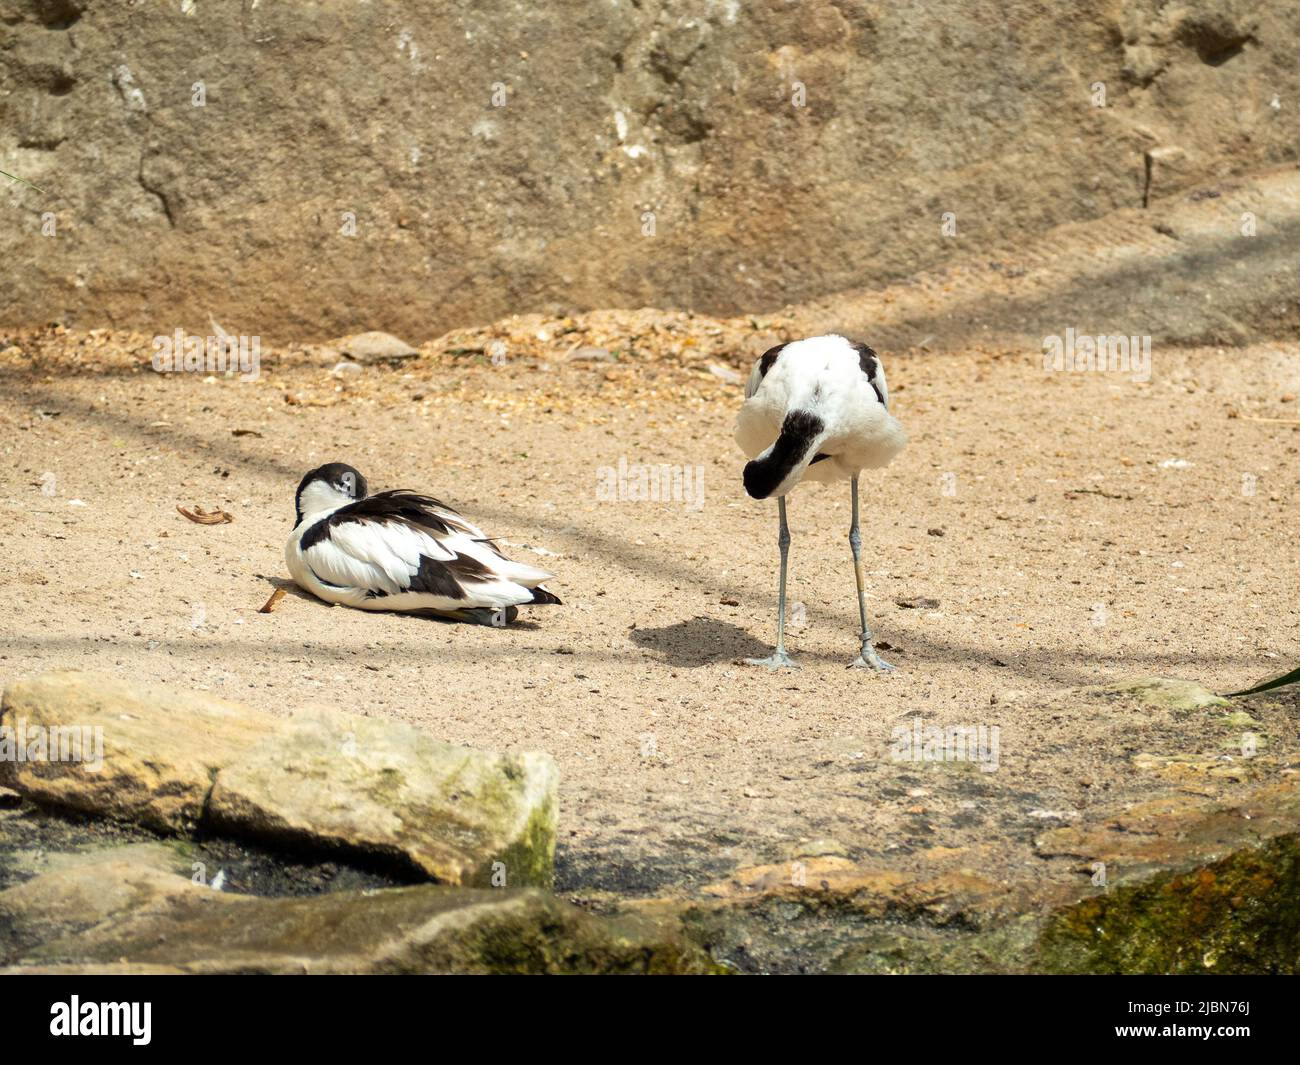 Bird Sandpiper Avocet with a thin long curved beak. Bird on the shore near the water. Stock Photo